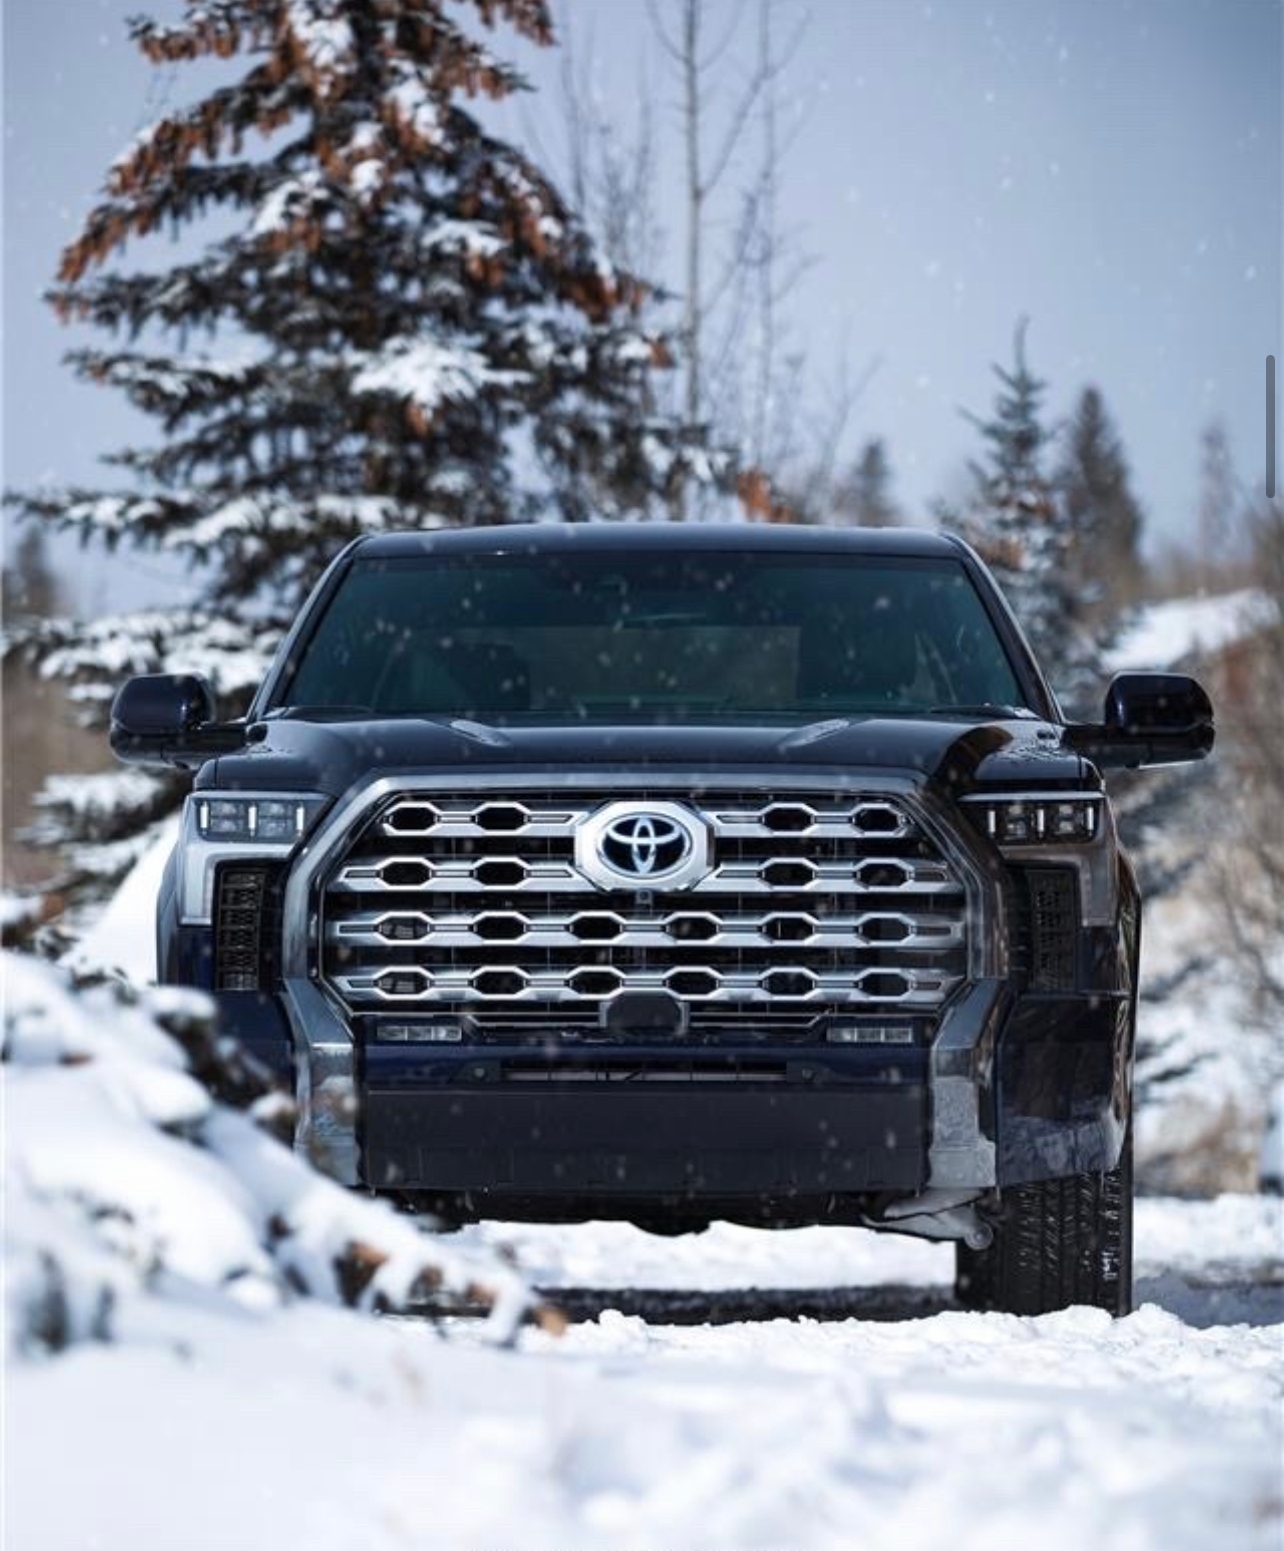 Tundra front on